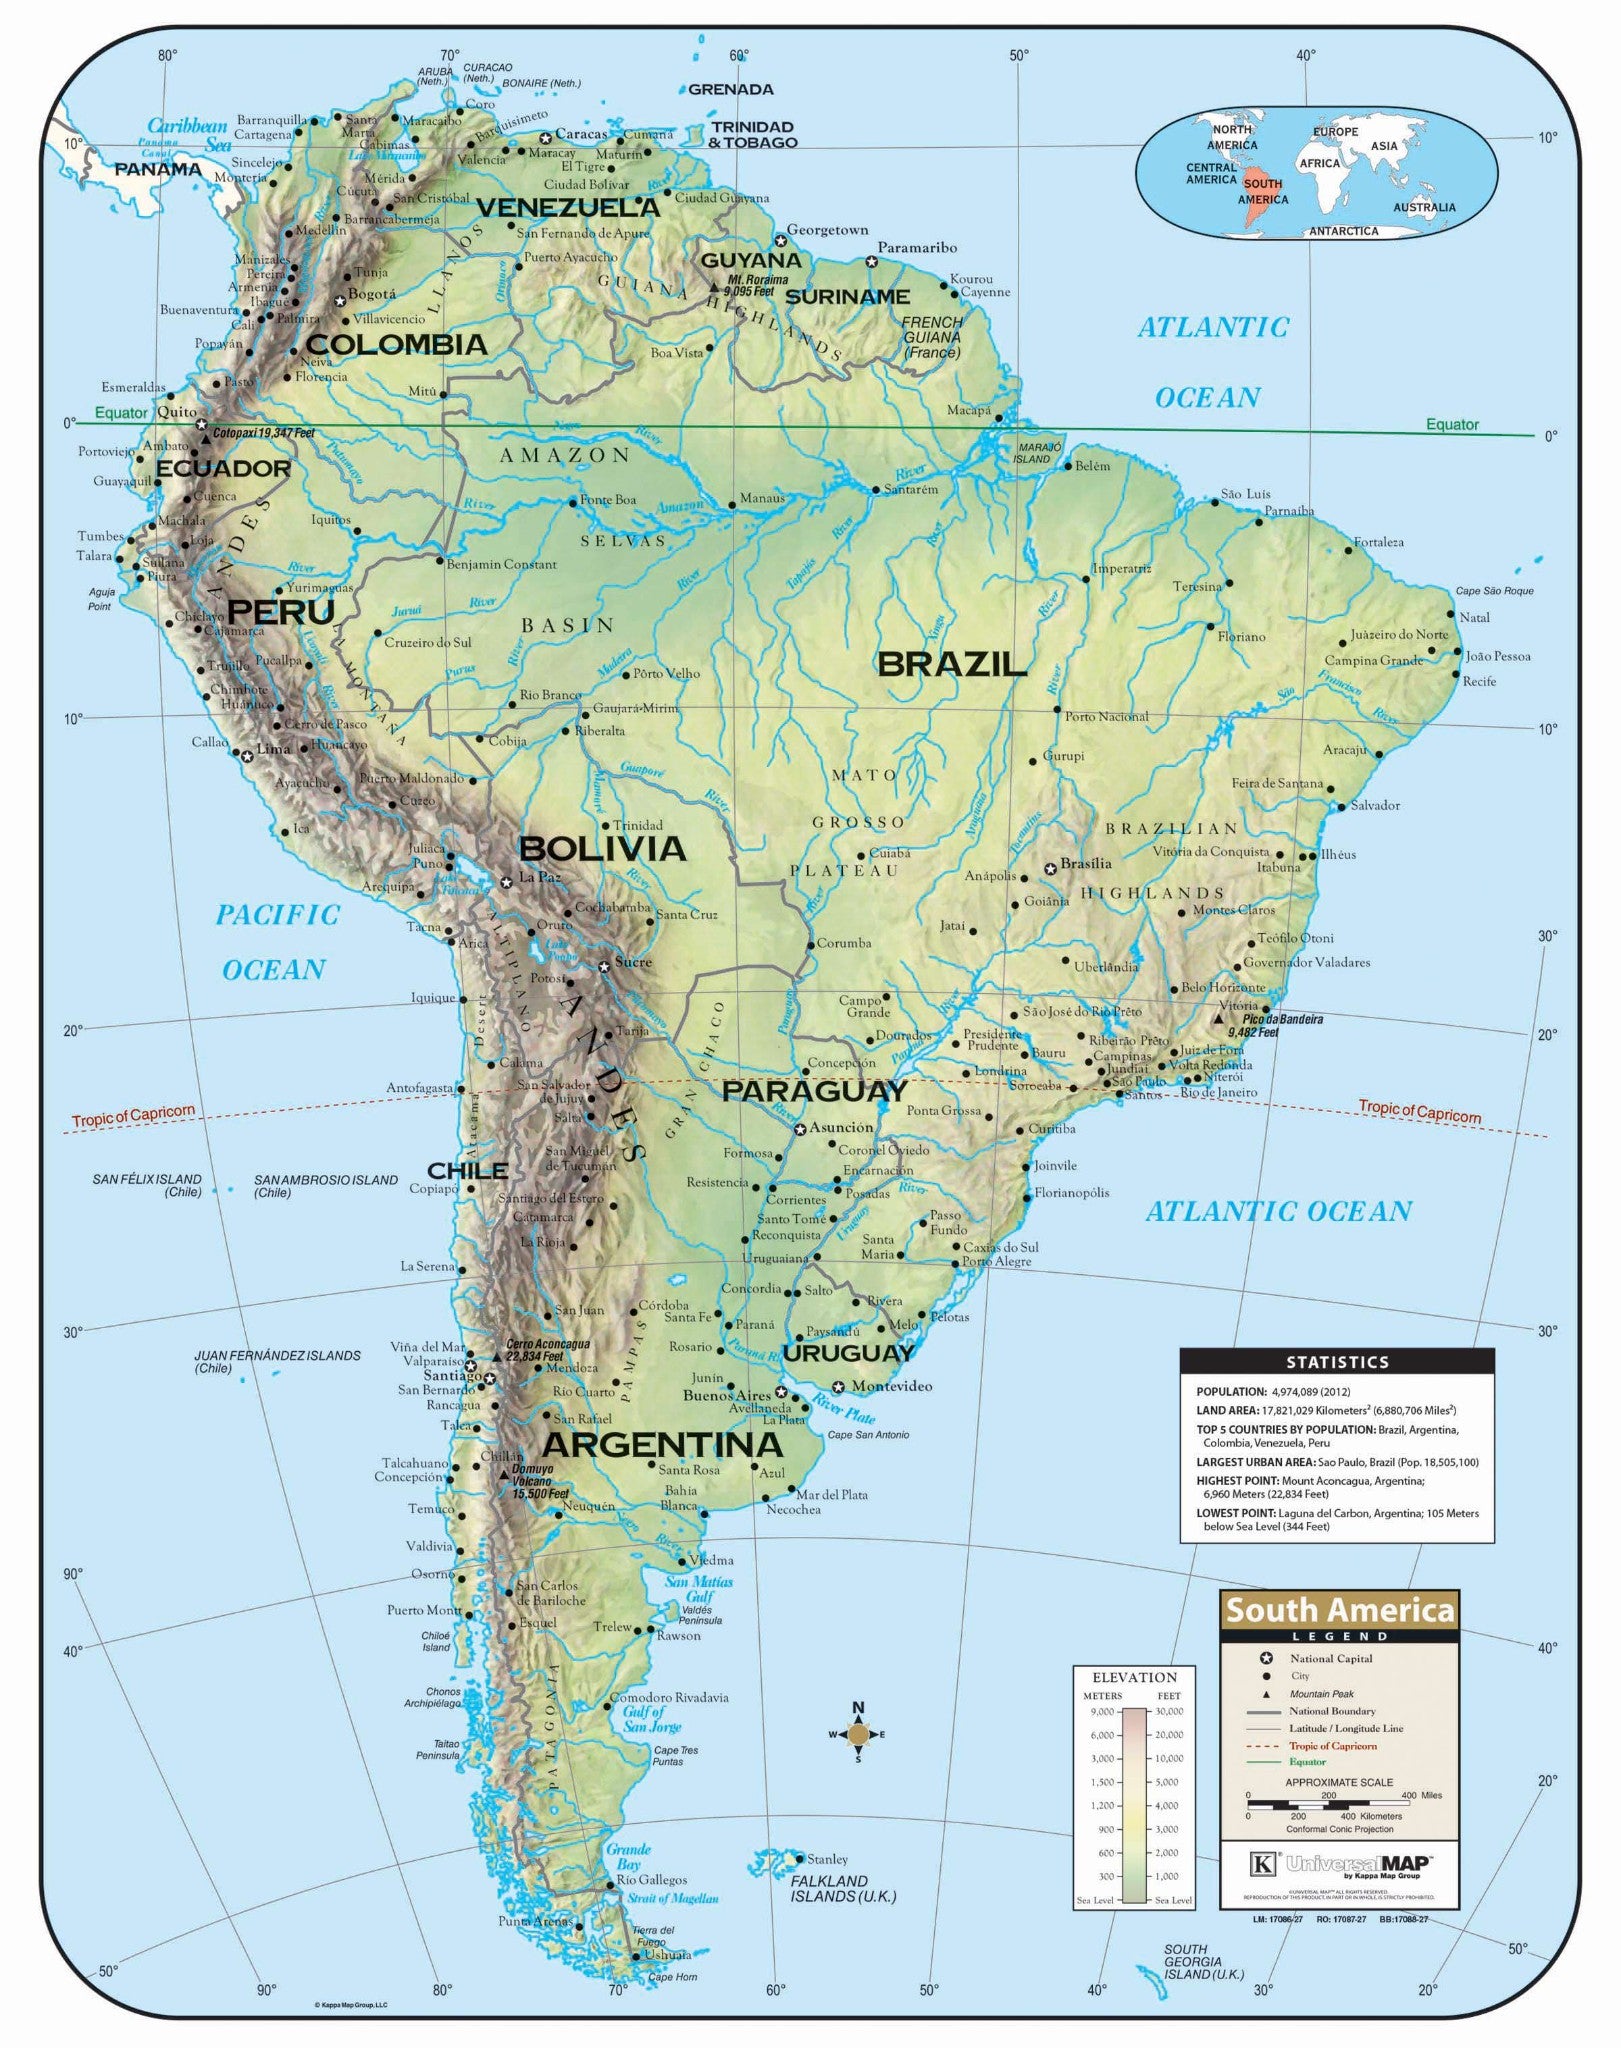 Kappa Map Group  South America Large Scale Shaded Relief Wall Map